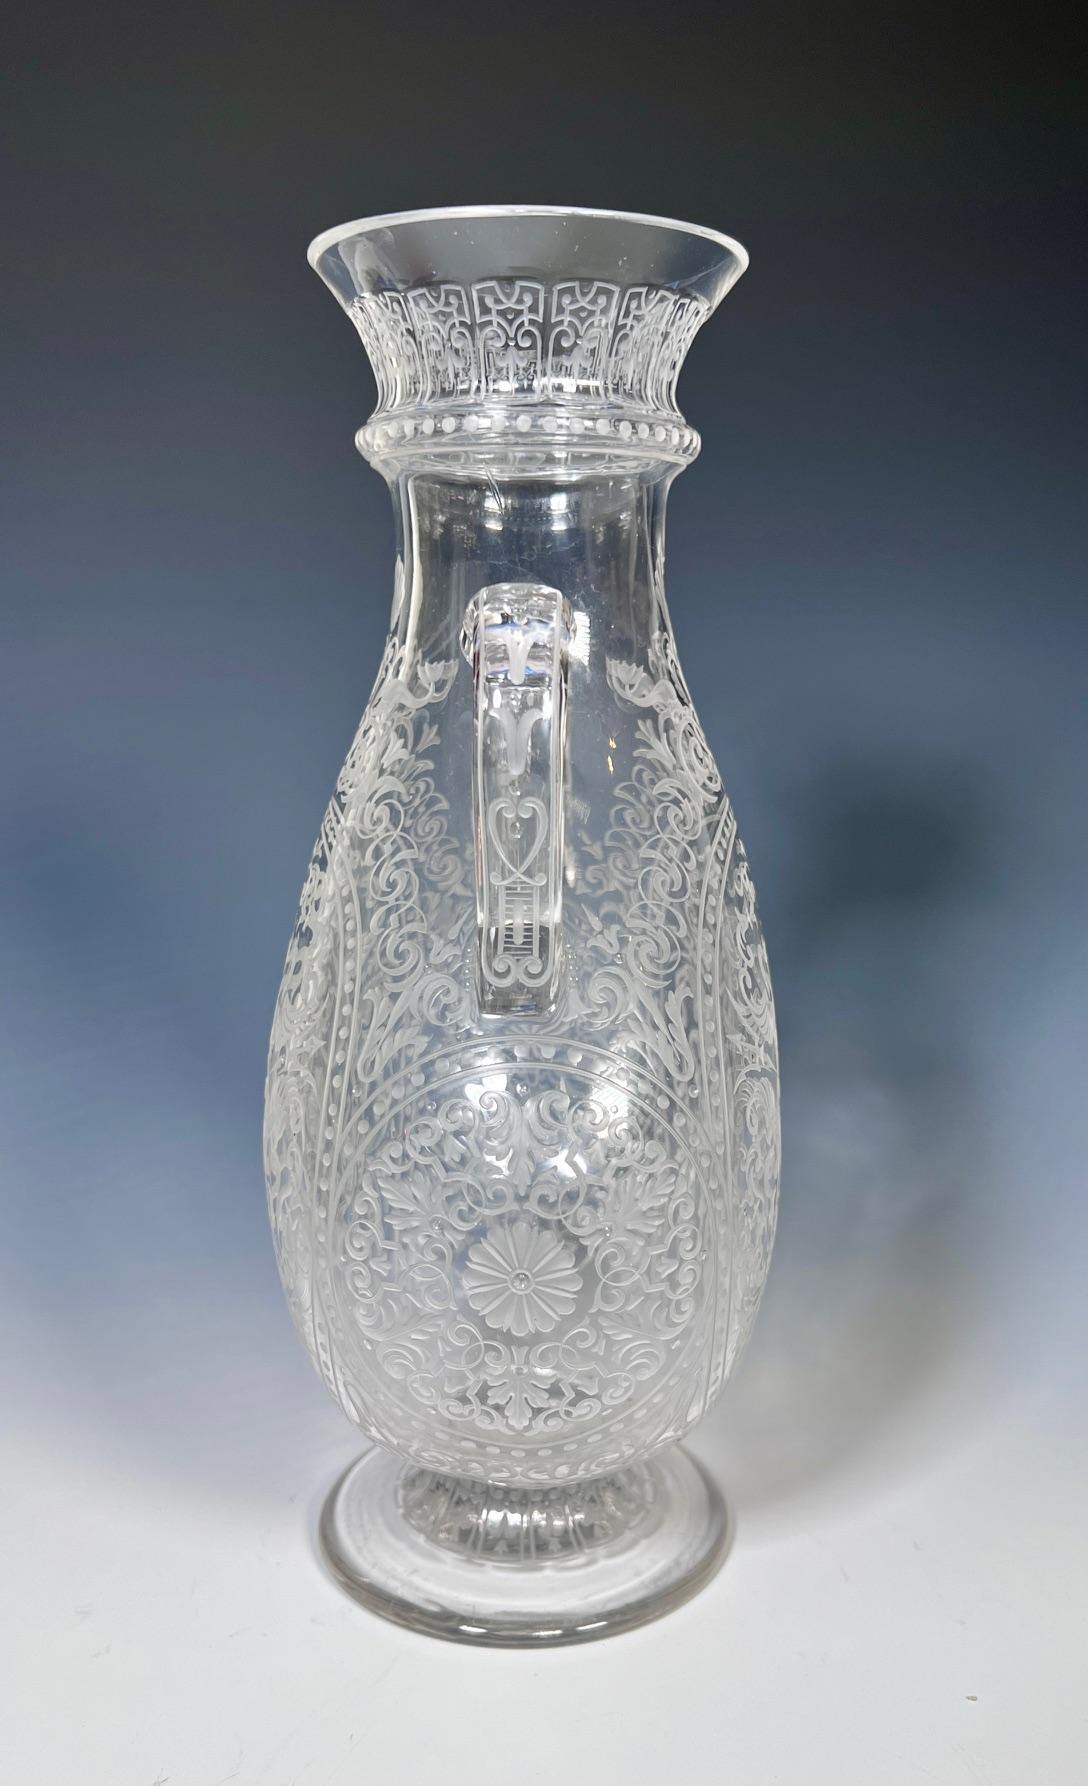 A museum quality rare example of the infamous factory of J & L Lobmeyr of Vienna, Austria, maker of stemware and decorative glass for European Royalty. This piece exhibits all of the details of the intricate craftsmanship of this factory with